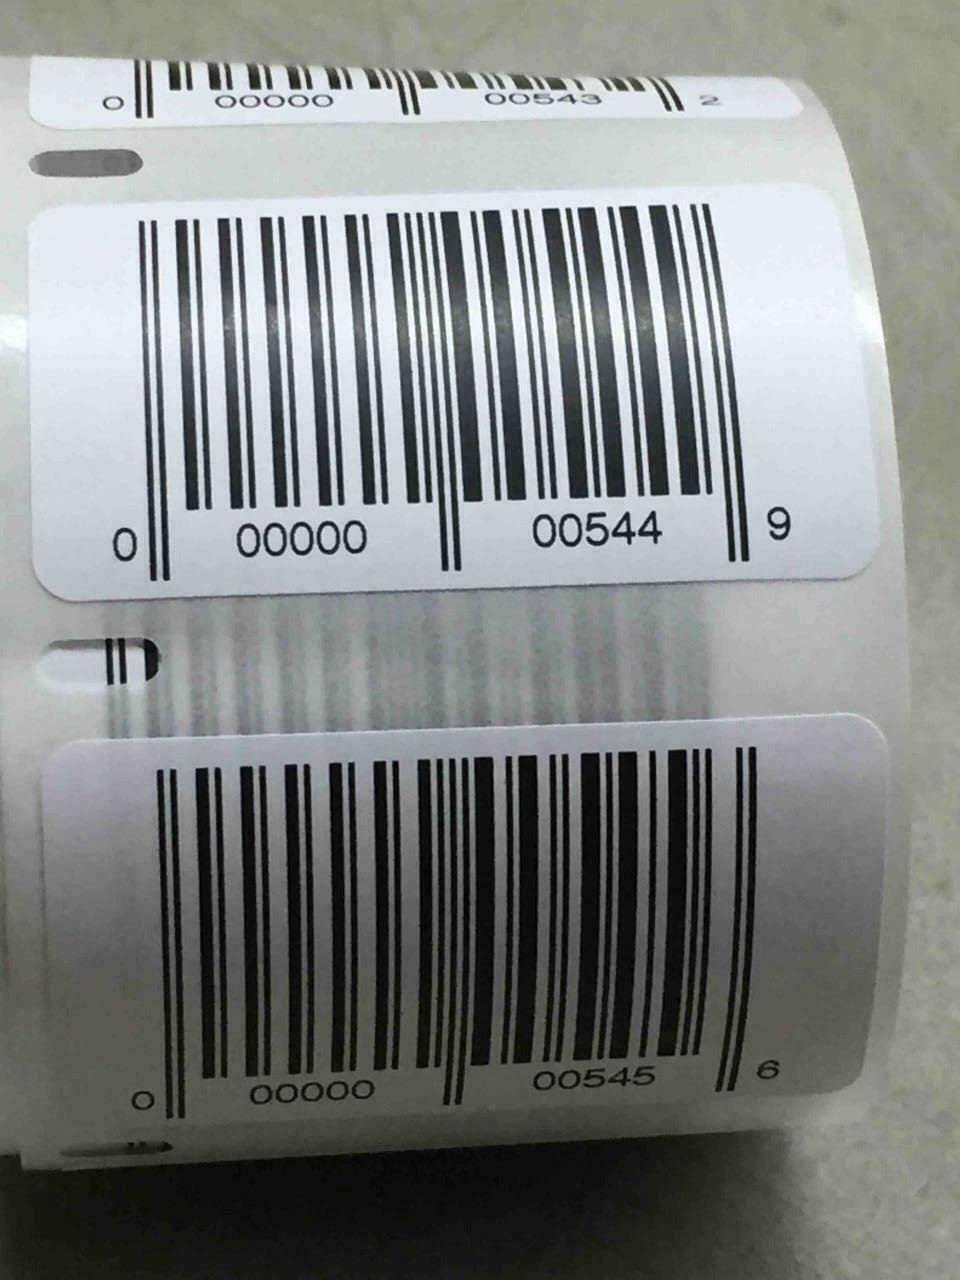 33-macy-s-return-label-code-labels-for-your-ideas